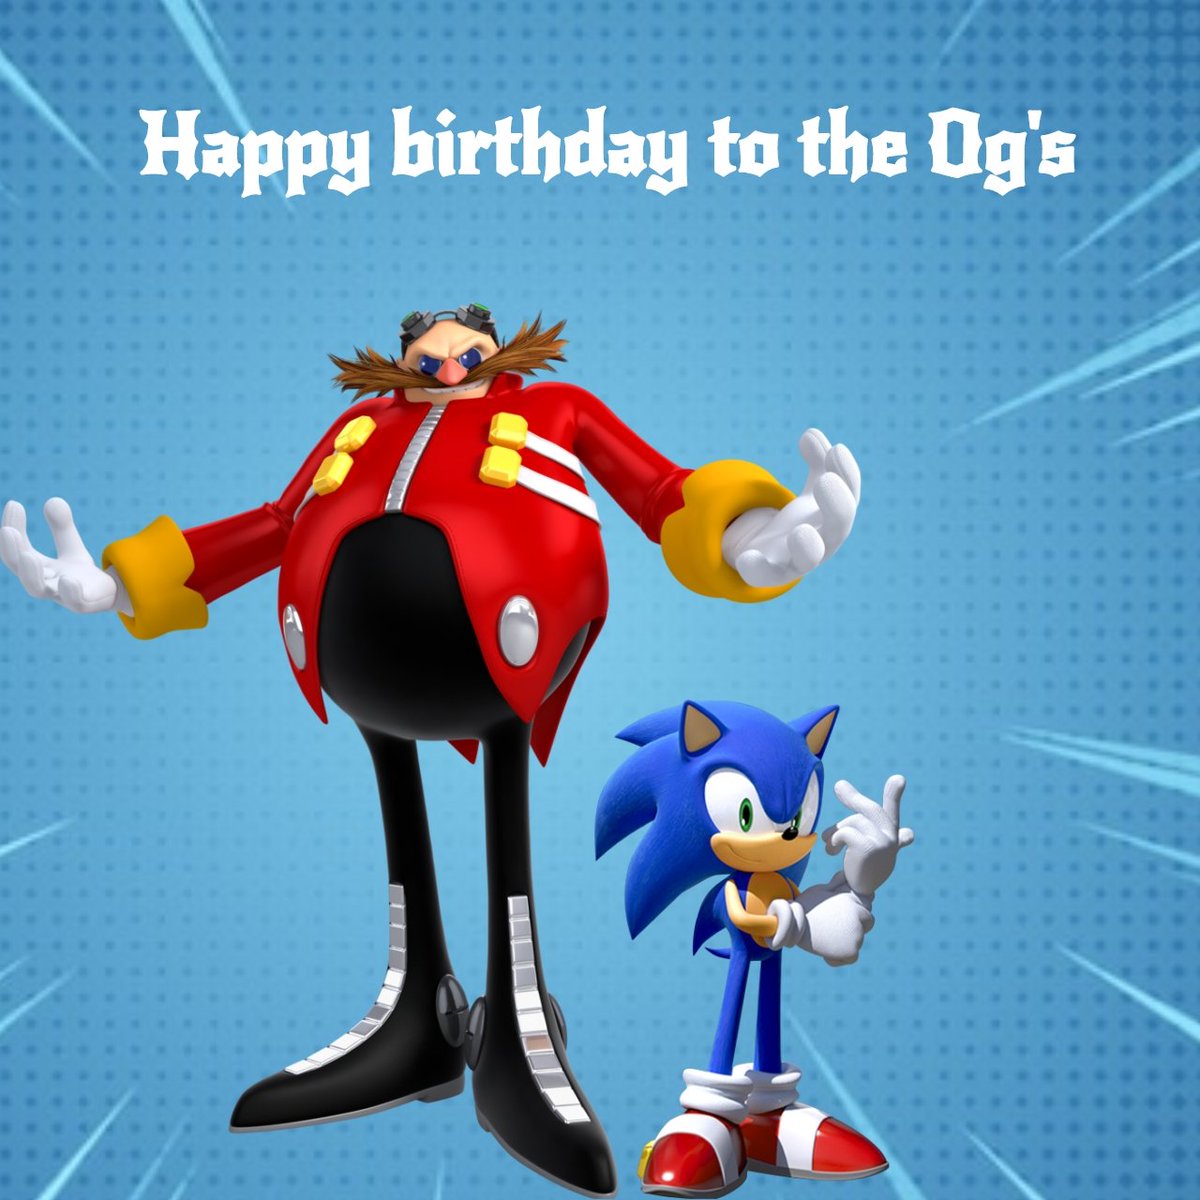 Everyone is saying happy birthday to Sonic but let's not forget

IT'S A CERTAIN EGGHEAD'S BIRTHDAY TOO

#HappyBirthday #DrEggman #and #SonicTheHedeghog